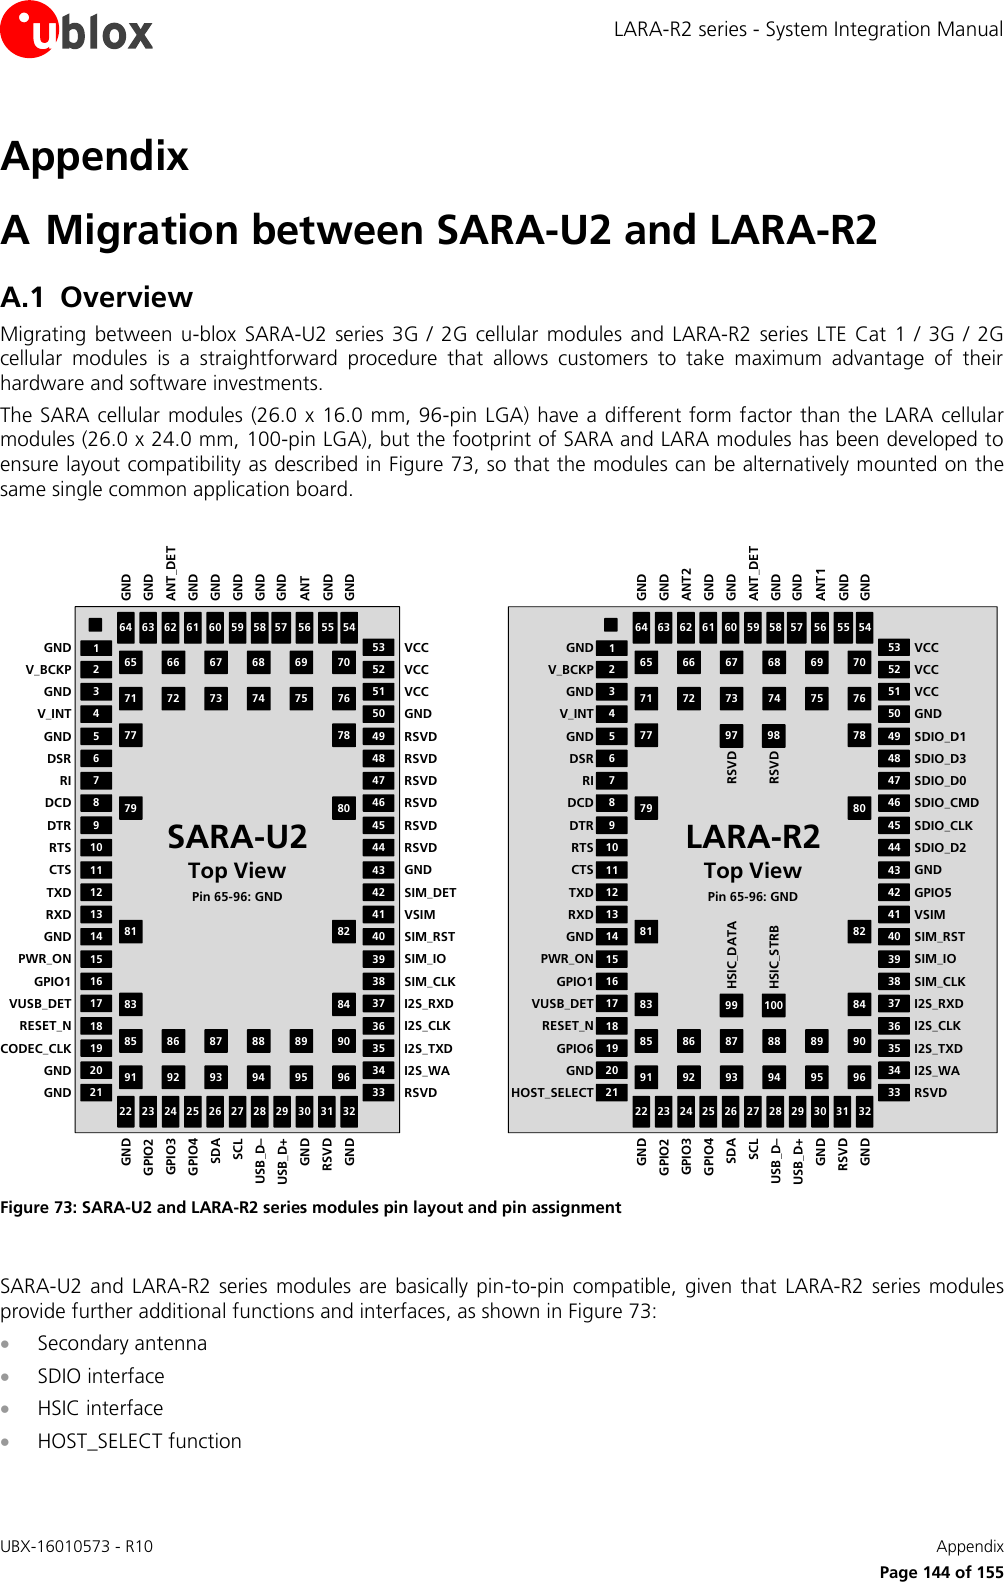 LARA-R2 series - System Integration Manual UBX-16010573 - R10    Appendix      Page 144 of 155 Appendix A Migration between SARA-U2 and LARA-R2 A.1 Overview Migrating  between  u-blox  SARA-U2  series 3G  / 2G  cellular  modules  and LARA-R2  series  LTE Cat  1 /  3G /  2G cellular  modules  is  a  straightforward  procedure  that  allows  customers  to  take  maximum  advantage  of  their hardware and software investments. The SARA cellular modules  (26.0 x 16.0 mm, 96-pin LGA) have a different form factor than the LARA cellular modules (26.0 x 24.0 mm, 100-pin LGA), but the footprint of SARA and LARA modules has been developed to ensure layout compatibility as described in Figure 73, so that the modules can be alternatively mounted on the same single common application board.  64 63 61 60 58 57 55 54225065 66 67 68 69 7071 72 73 74 75 7677 7879 8081 8283 8485 86 87 88 89 9091 92 93 94 95 96CTSRTSDCDRIV_INTV_BCKPGNDCODEC_CLKRESET_NGPIO1PWR_ONRXDTXD11108754212119181615131232017149623 25 26 28 29 31 3224 27 3043444647495253333536383941425148454037345962 56GNDGNDDSRDTRGNDVUSB_DETGNDUSB_D–USB_D+RSVDGNDGPIO2GPIO3SDASCLGPIO4GNDGNDGNDGNDVCCVCCRSVDI2S_TXDI2S_CLKSIM_CLKSIM_IOVSIMSIM_DETVCCSIM_RSTI2S_RXDI2S_WAGNDGNDGNDGNDGNDGNDGNDGNDGNDANT_DETANTSARA-U2Top ViewPin 65-96: GNDGNDRSVDRSVDRSVDRSVDRSVD RSVD64 63 61 60 58 57 55 54225065 66 67 68 69 7071 72 73 74 75 7677 7879 8081 8283 8485 86 87 88 89 9091 92 93 94 95 96CTSRTSDCDRIV_INTV_BCKPGNDGPIO6RESET_NGPIO1PWR_ONRXDTXD11108754212119181615131232017149623 25 26 28 29 31 3224 27 3043444647495253333536383941425148454037345962 56GNDGNDDSRDTRGNDVUSB_DETGNDUSB_D–USB_D+RSVDGNDGPIO2GPIO3SDASCLGPIO4GNDGNDGNDGNDVCCVCCRSVDI2S_TXDI2S_CLKSIM_CLKSIM_IOVSIMGPIO5VCCSIM_RSTI2S_RXDI2S_WAGNDGNDGNDGNDGNDGNDGNDGNDANT_DETANT2ANT1LARA-R2Top ViewPin 65-96: GND99 10097 98RSVDRSVDHSIC_STRBHSIC_DATAHOST_SELECTSDIO_D2SDIO_CMDSDIO_D0SDIO_D1SDIO_D3SDIO_CLK Figure 73: SARA-U2 and LARA-R2 series modules pin layout and pin assignment  SARA-U2  and LARA-R2  series  modules are  basically pin-to-pin  compatible,  given that  LARA-R2 series  modules provide further additional functions and interfaces, as shown in Figure 73:  Secondary antenna  SDIO interface  HSIC interface  HOST_SELECT function  